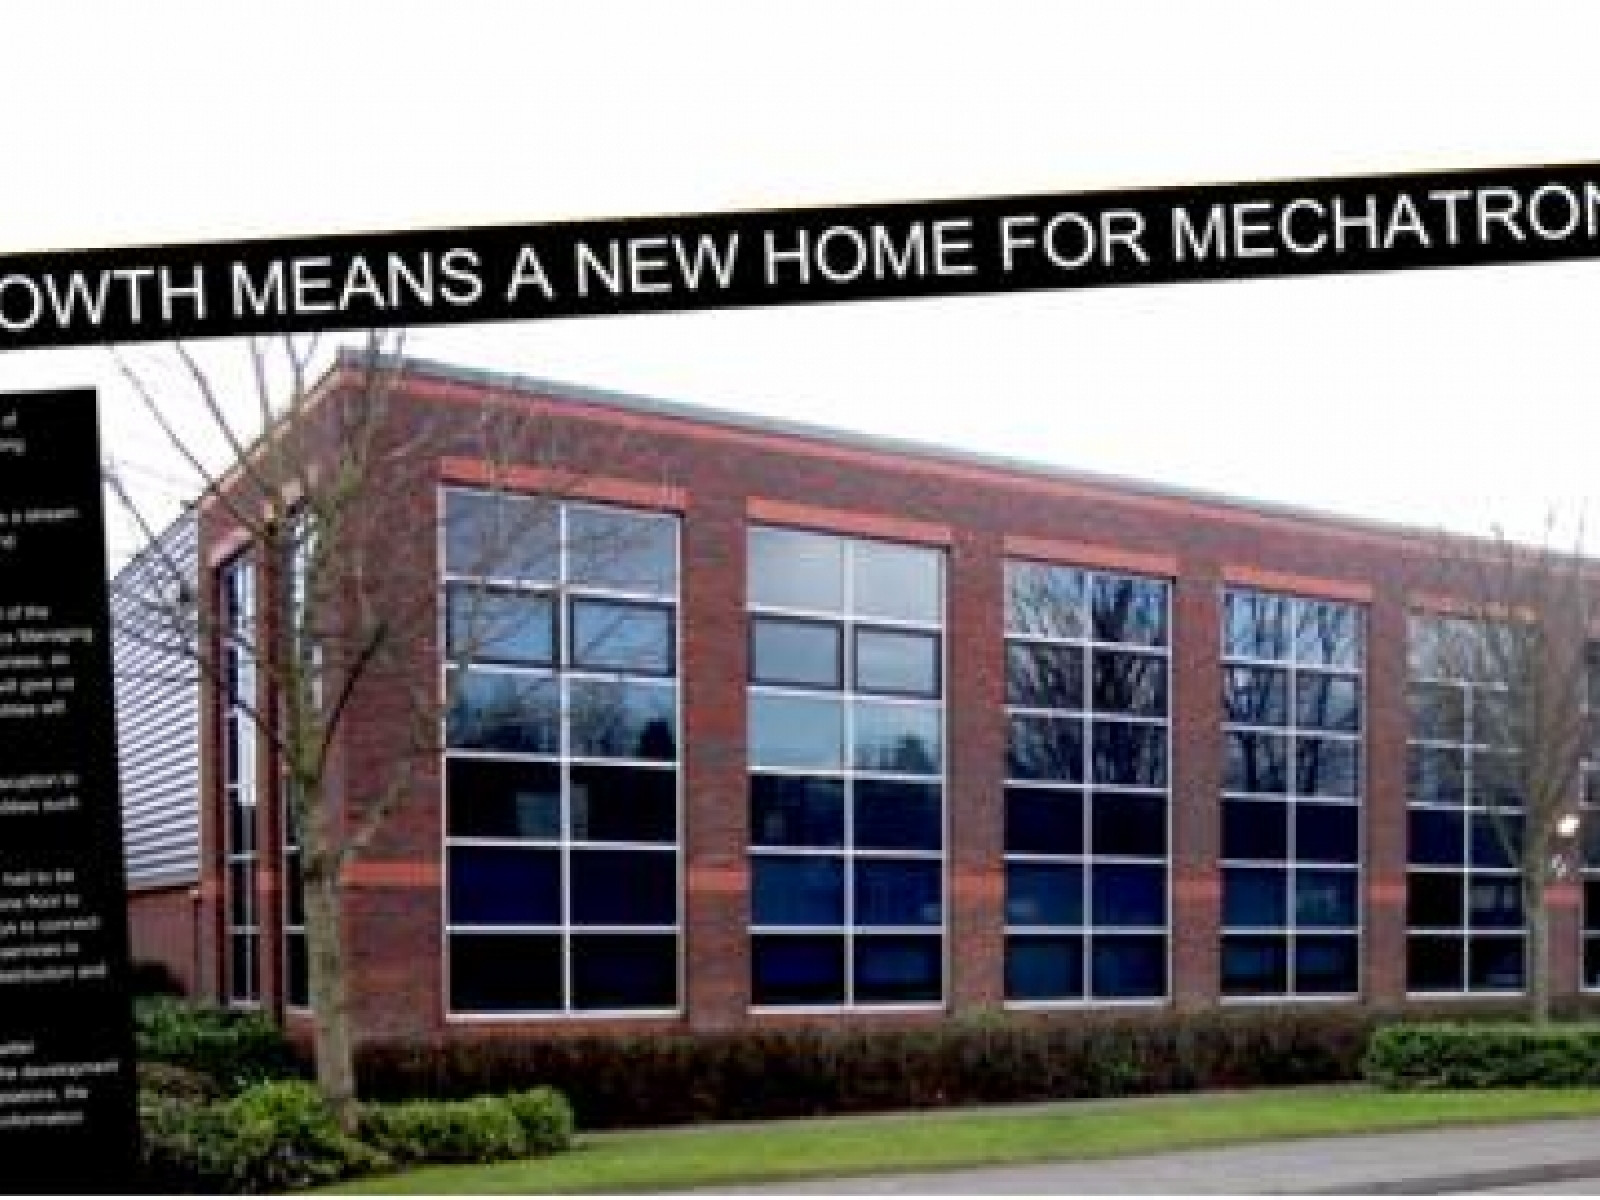 IMPRESSIVE GROWTH MEANS A NEW HOME FOR MECHATRONIC